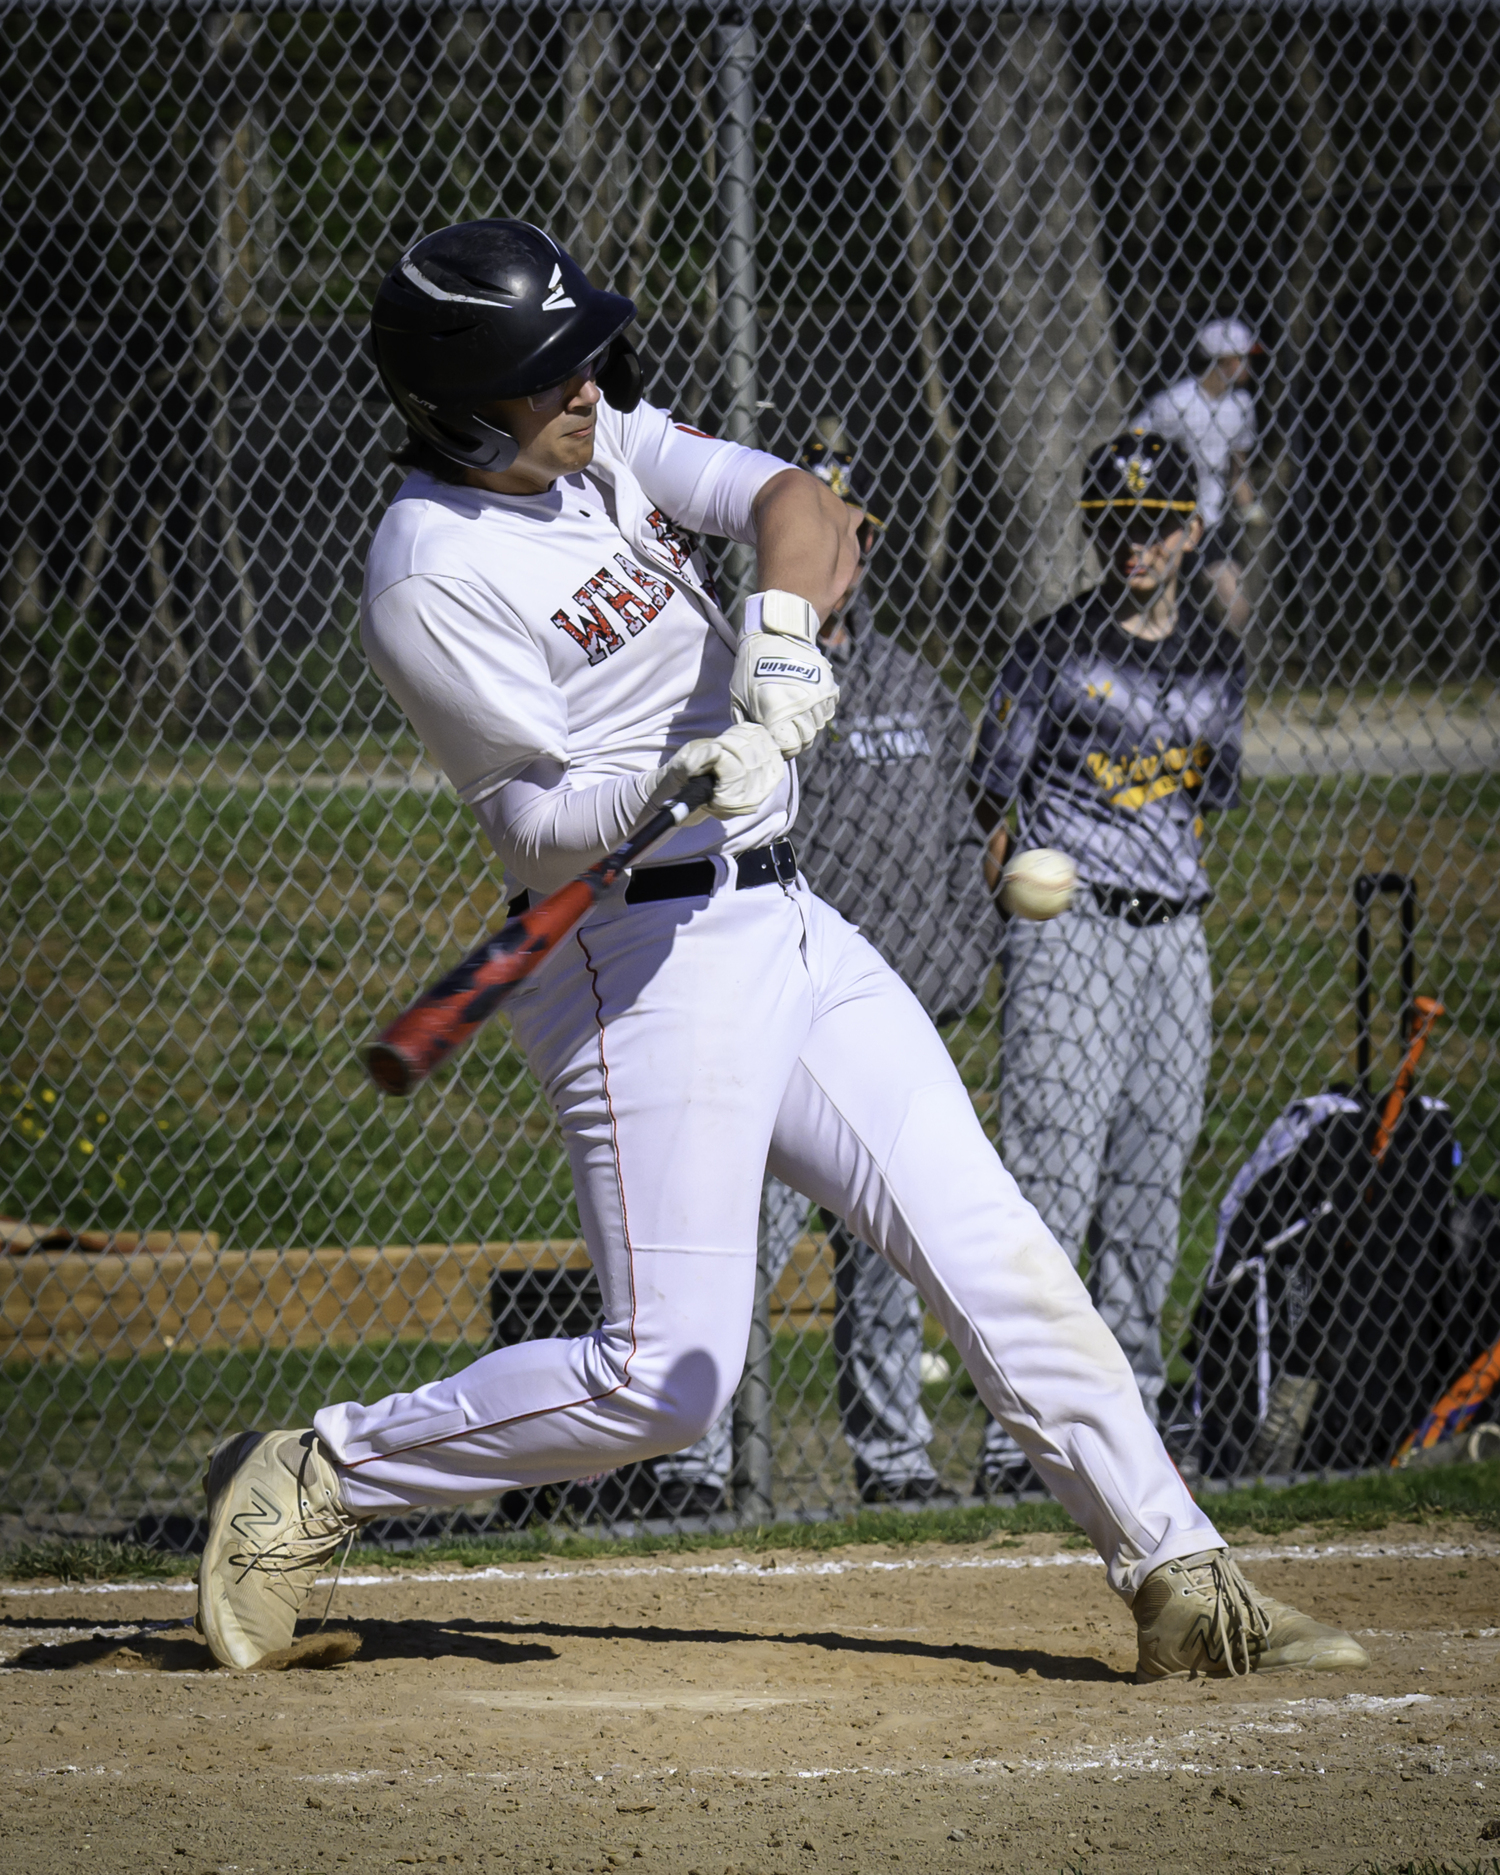 Pierson senior Charles Schaefer with a base hit in game two of the series on May 1. His bases-clearing double in the third game of the series the following day broke that game open for the Whalers.   MARIANNE BARNETT